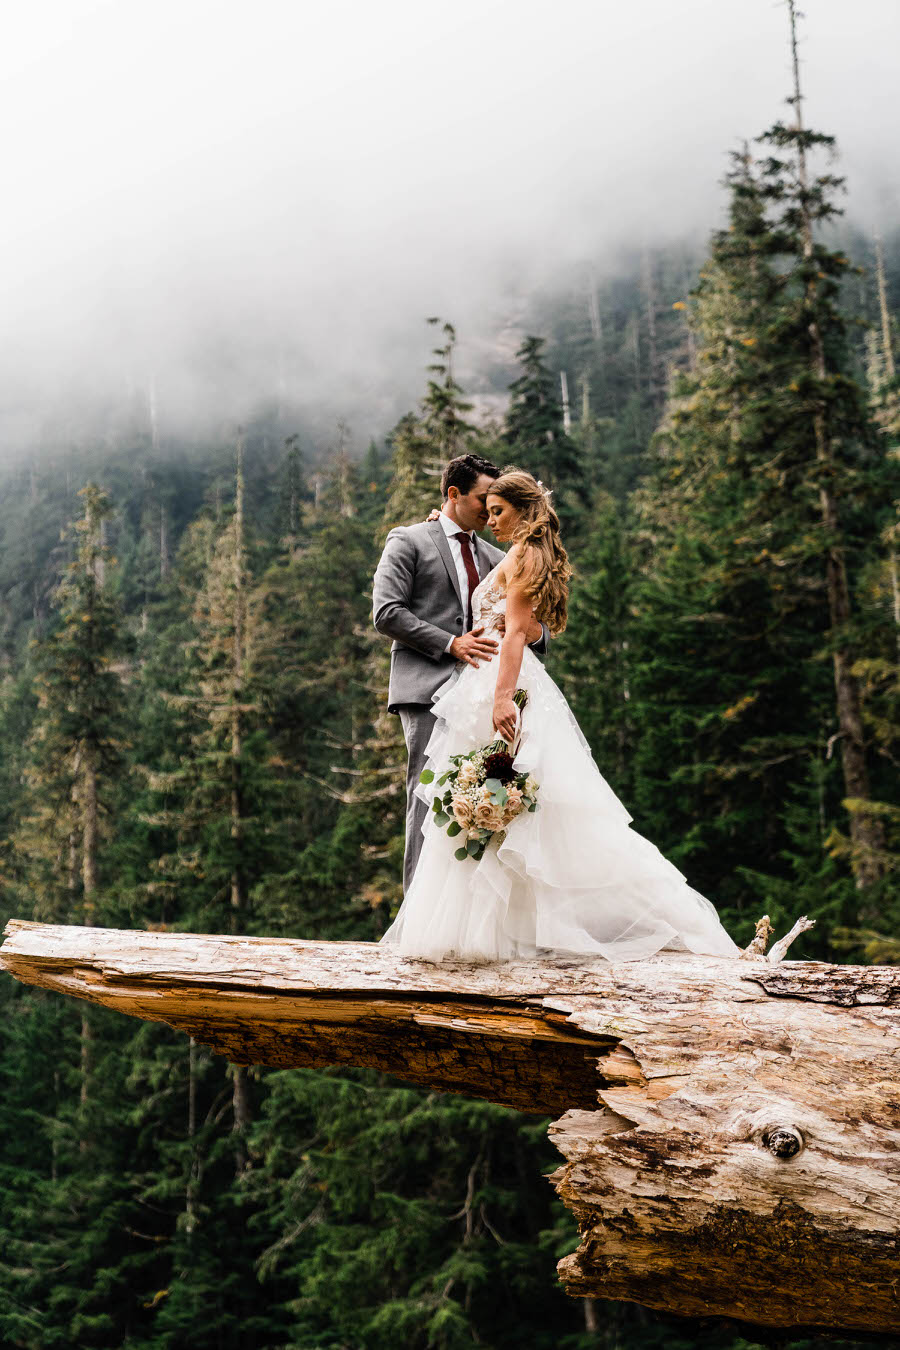 A bride and groom stand on a giant fallen log in the Washington backcountry after their mountain wedding in the backcountry